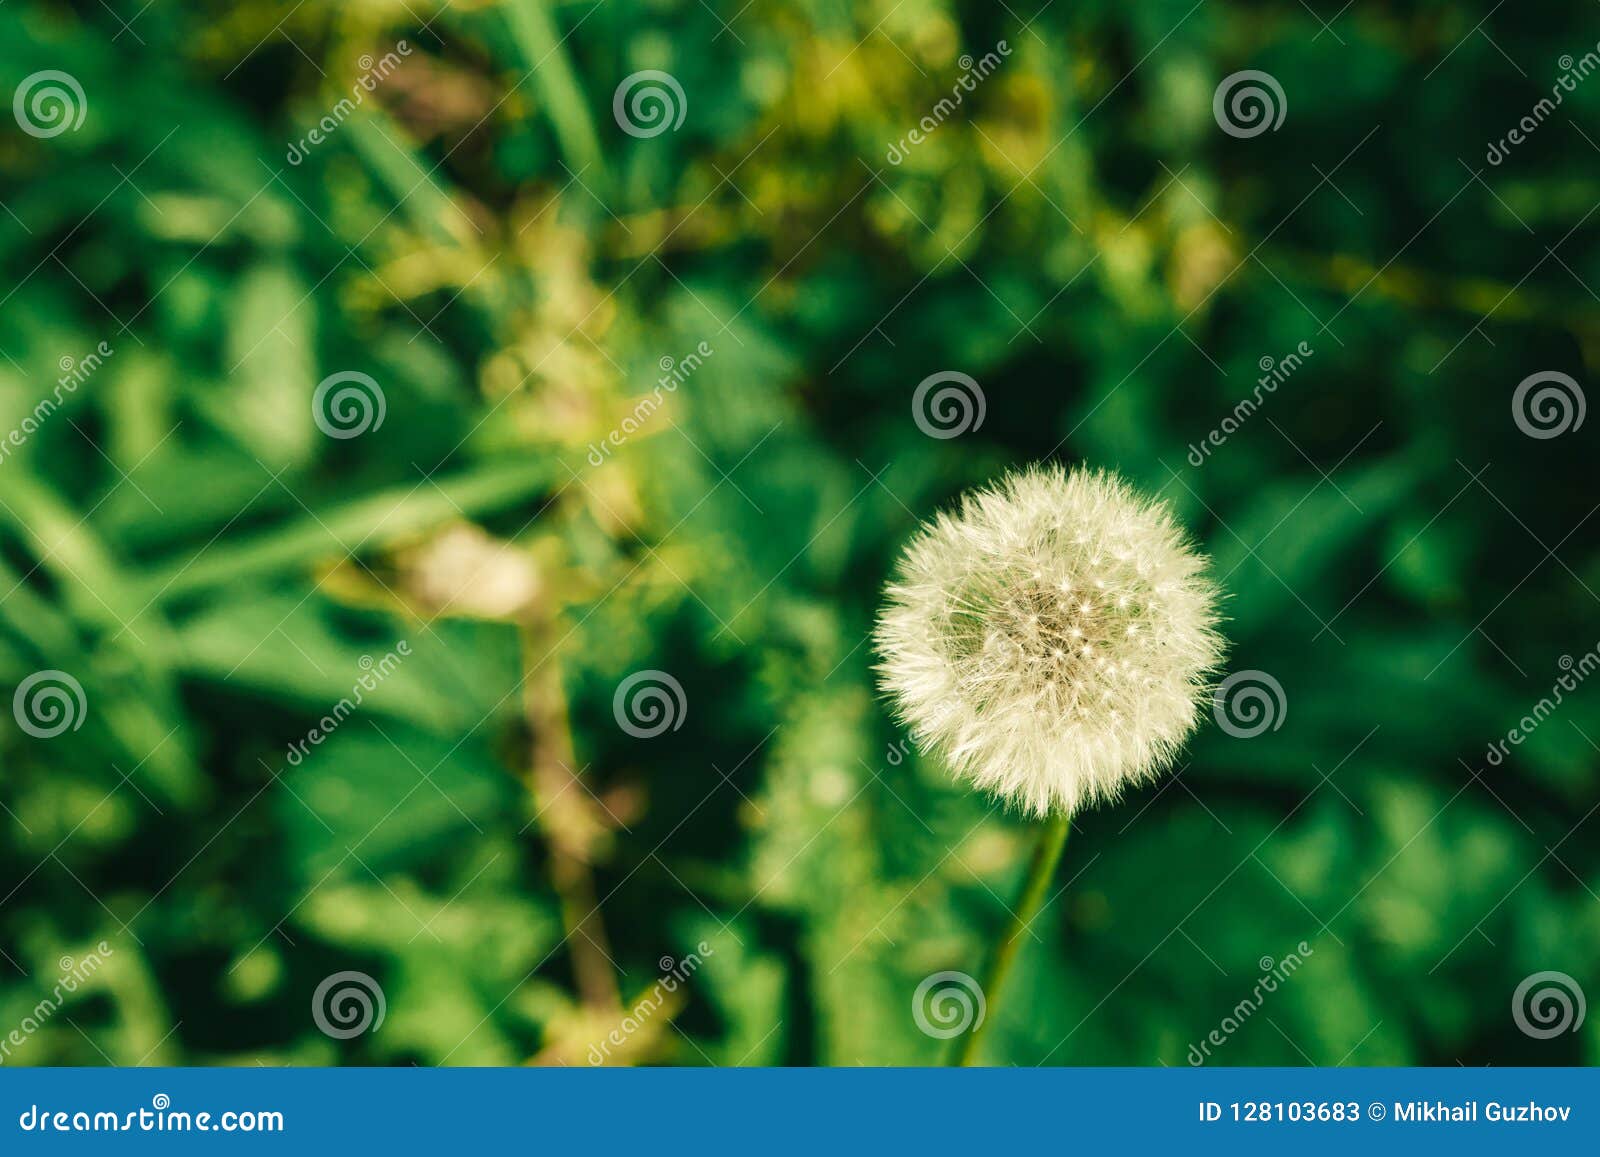 dandelion growing in the green grass in the summer